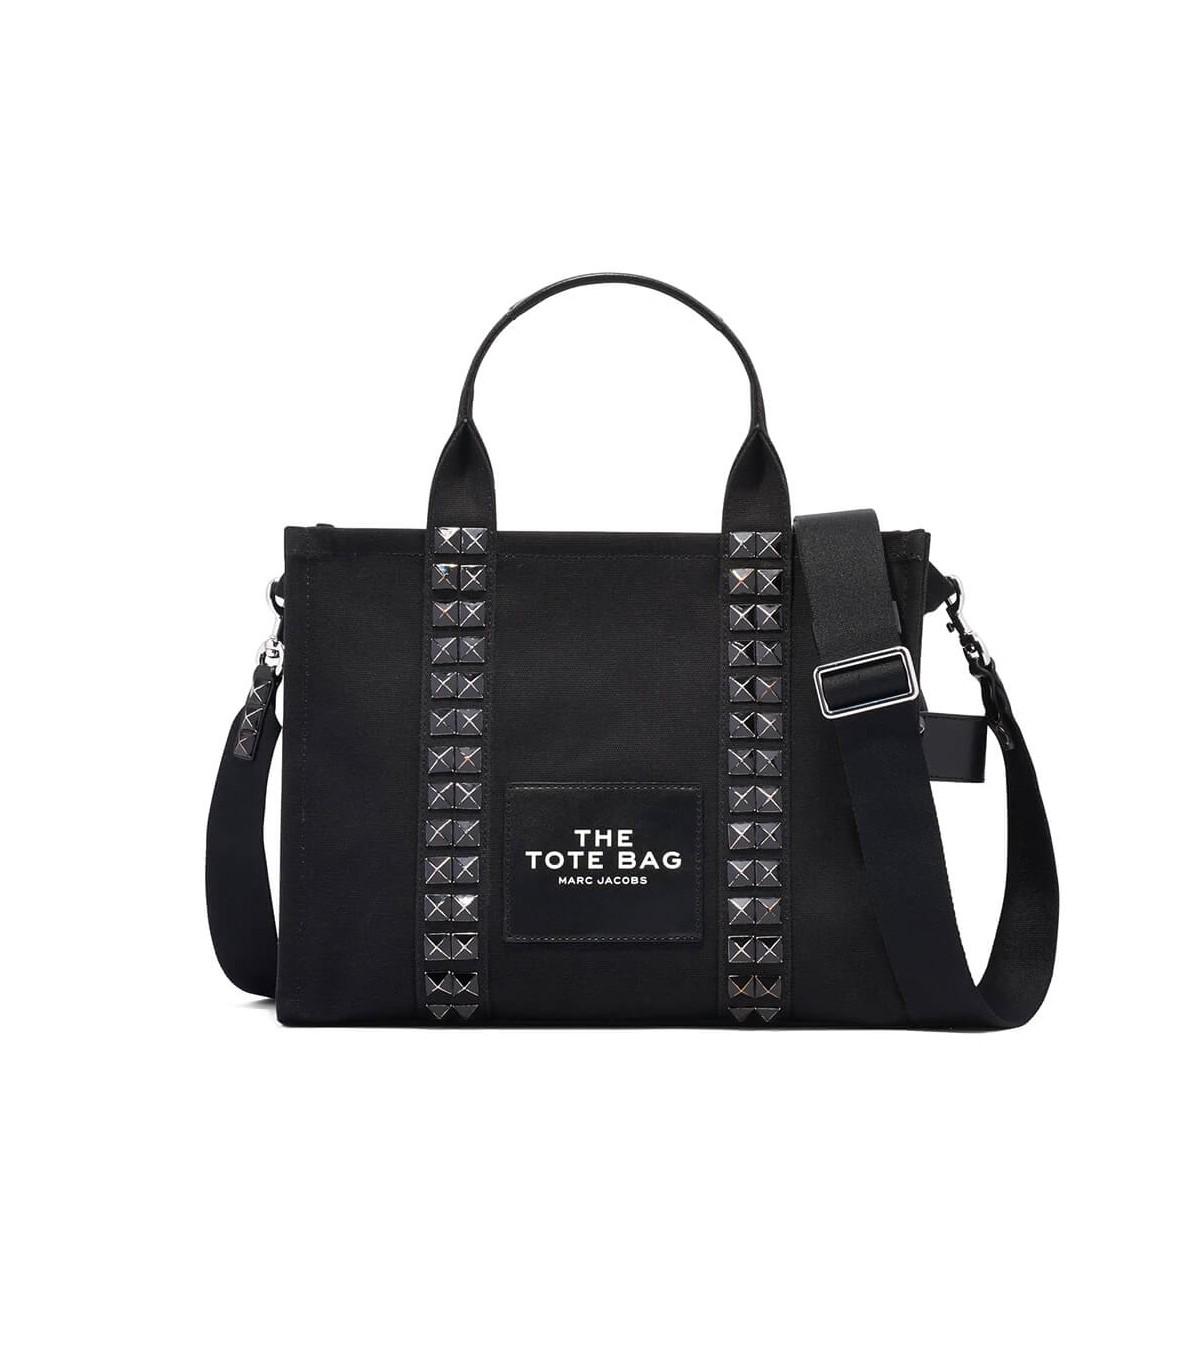 Marc Jacobs The Medium Studded Tote Bag in Black